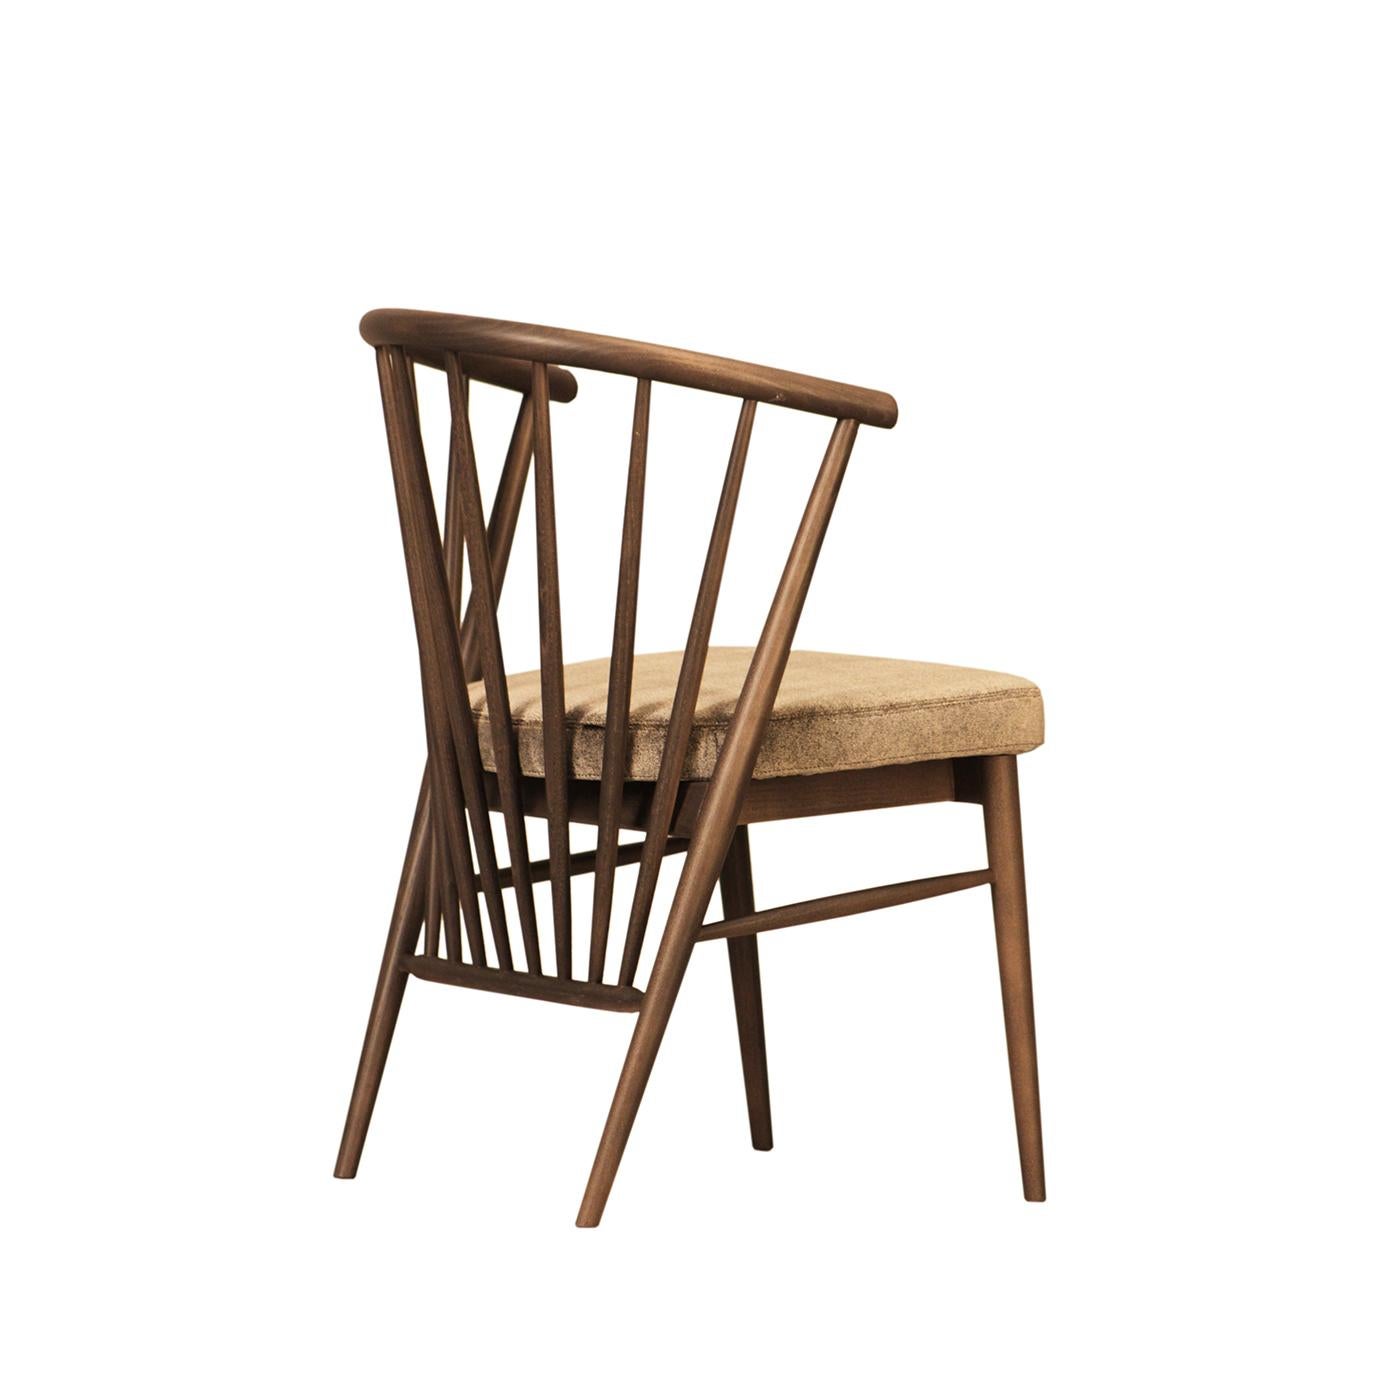 This exquisite chair is marked by an sculptural design that focuses on the harmony between sharp and rounded lines. The ash frame comprises an eye-catching backrest distinguished by radially converging elements oriented downwards and continuing down